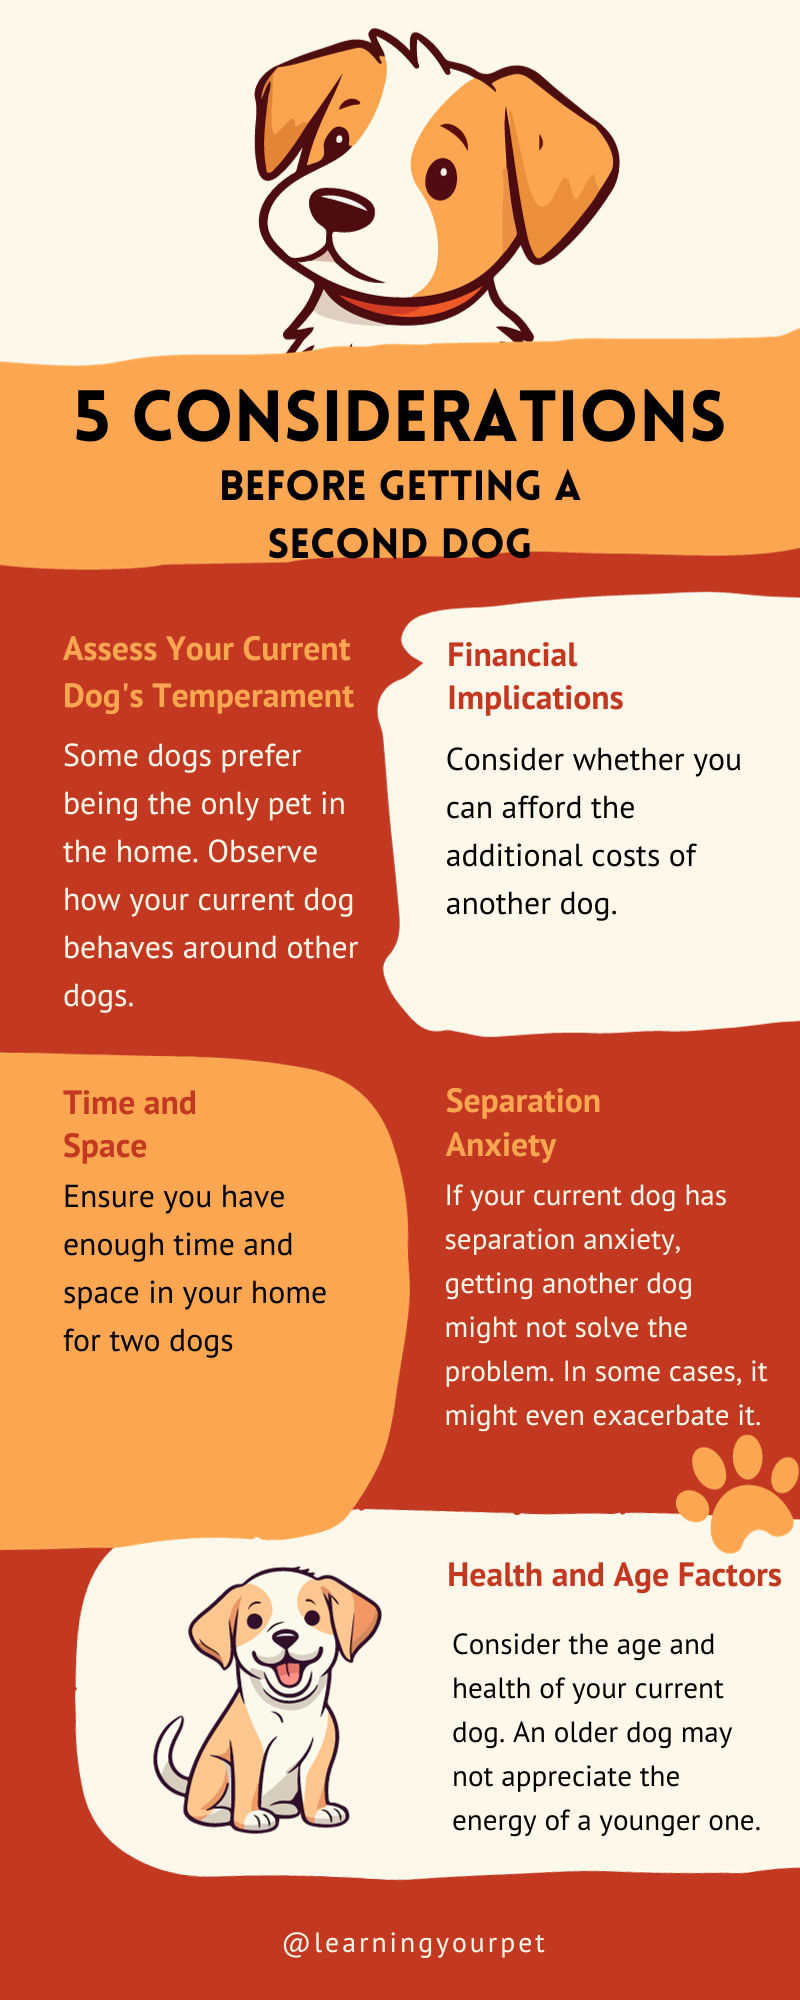 Considerations Before Getting a Second Dog